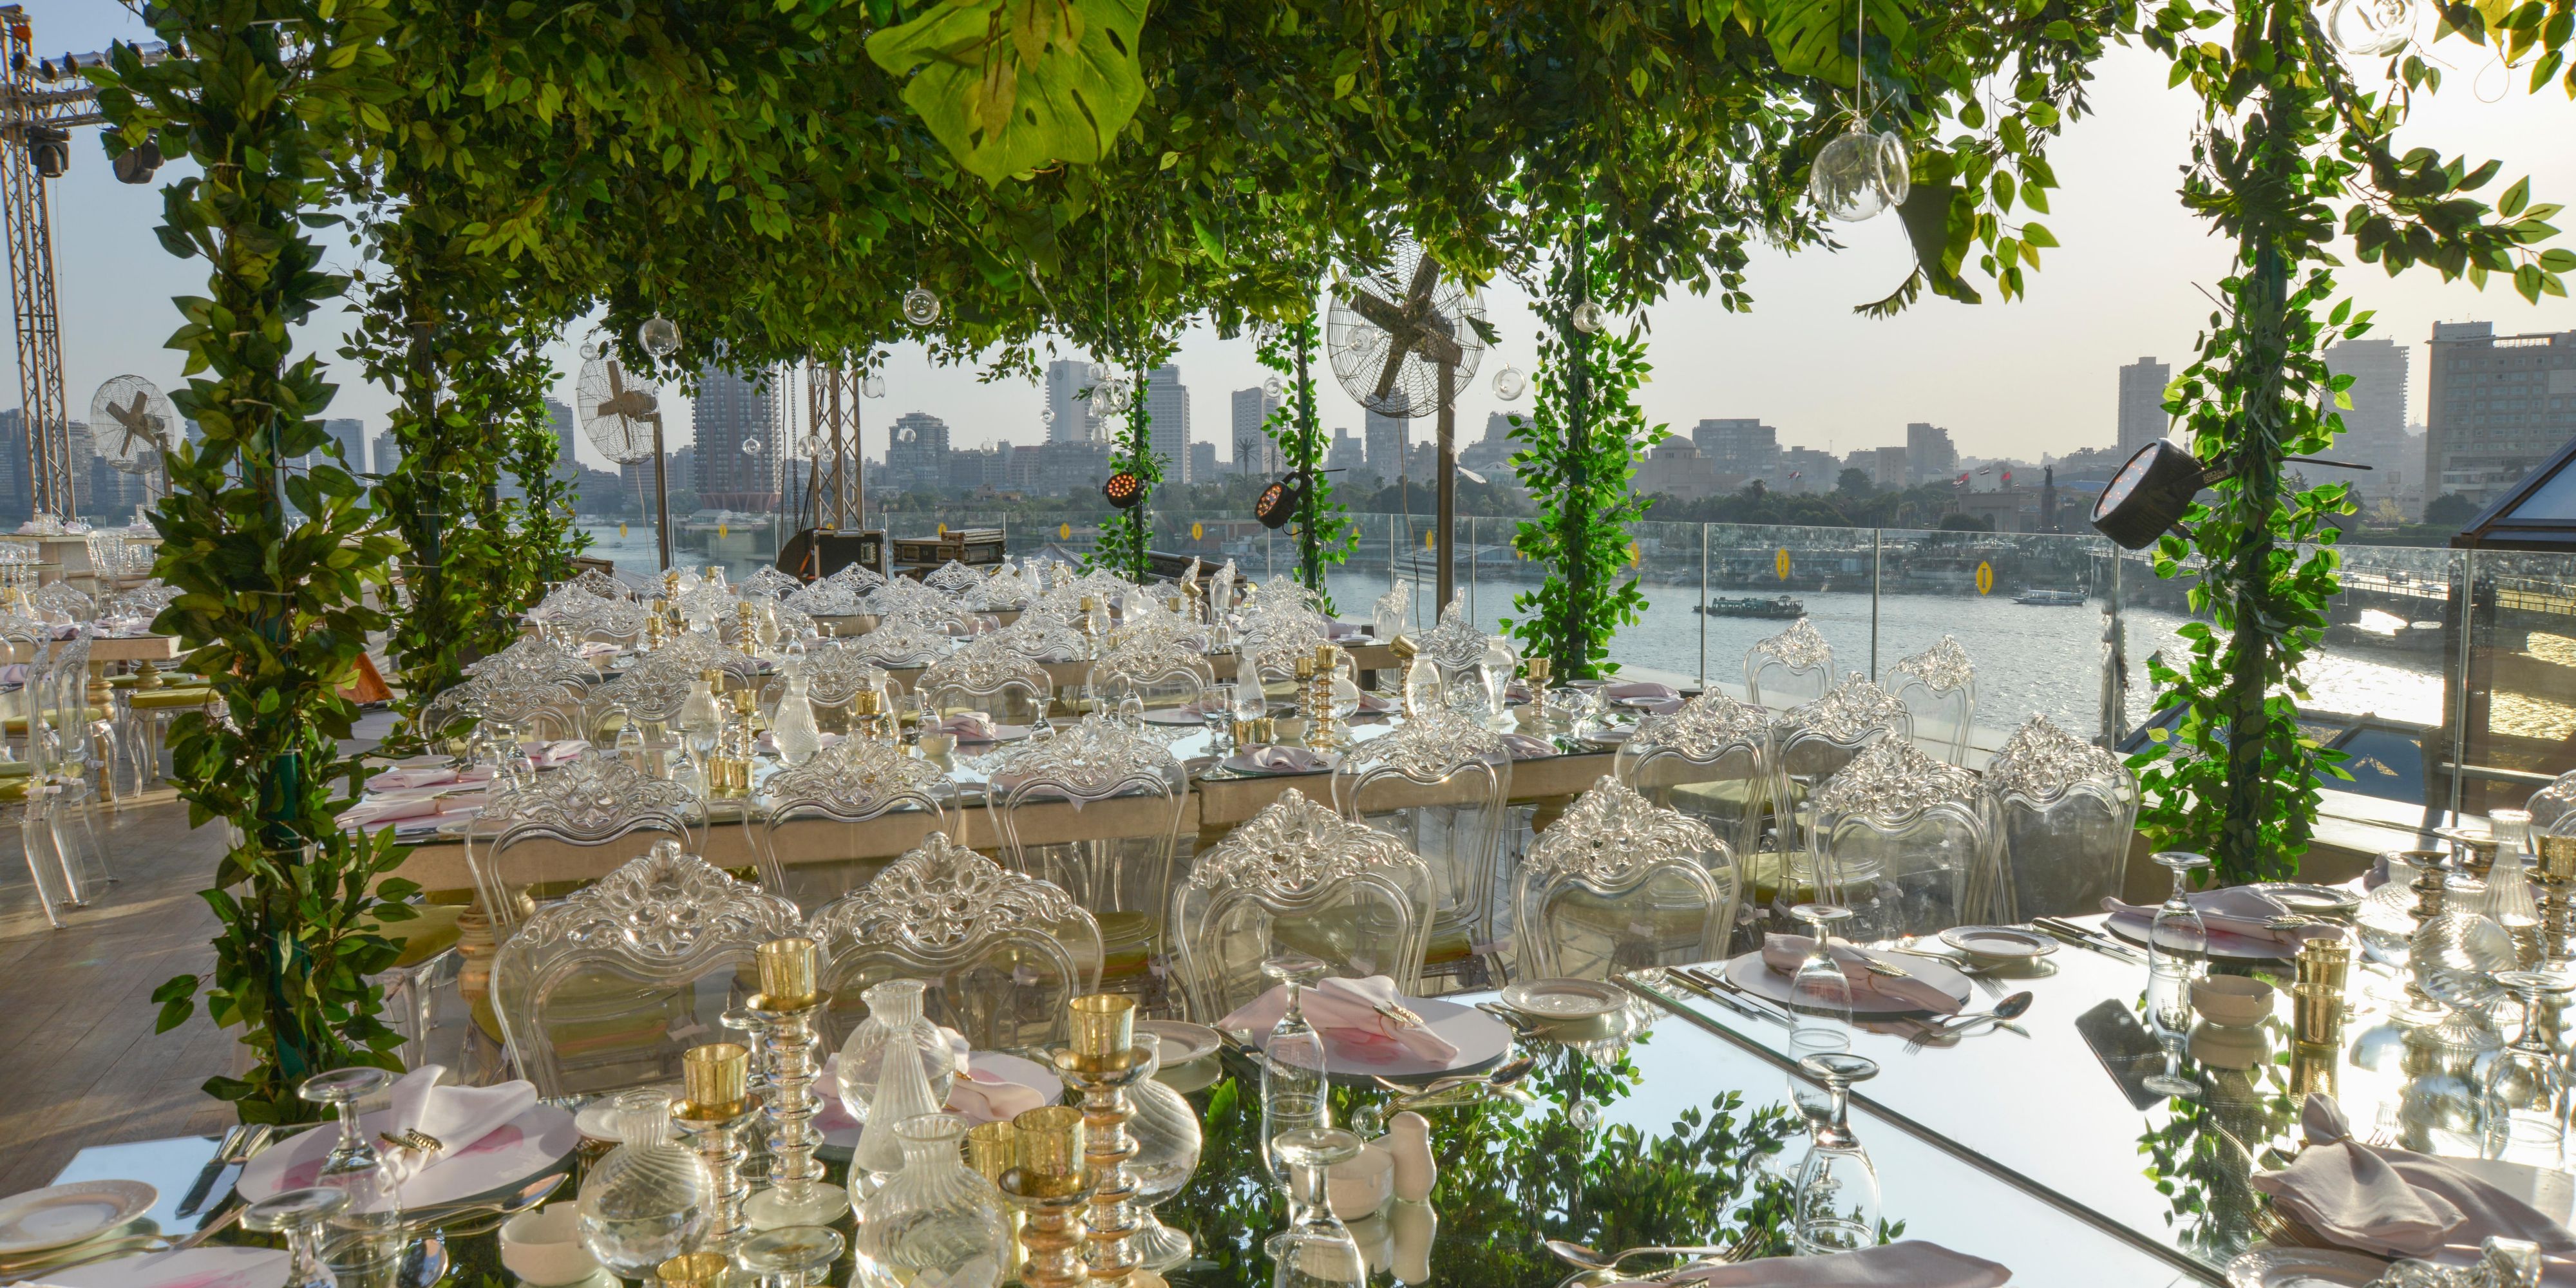 At Semiramis InterContinental Cairo, we draw on the heritage of the region by offering a number of entrancing wedding venues. The splendid setting of the new Cleopatra can host up to 1,200 guests for the grandest of occasions whilst Teeba, Nile Terrace and Pool Terrace offer stunning Nile views.